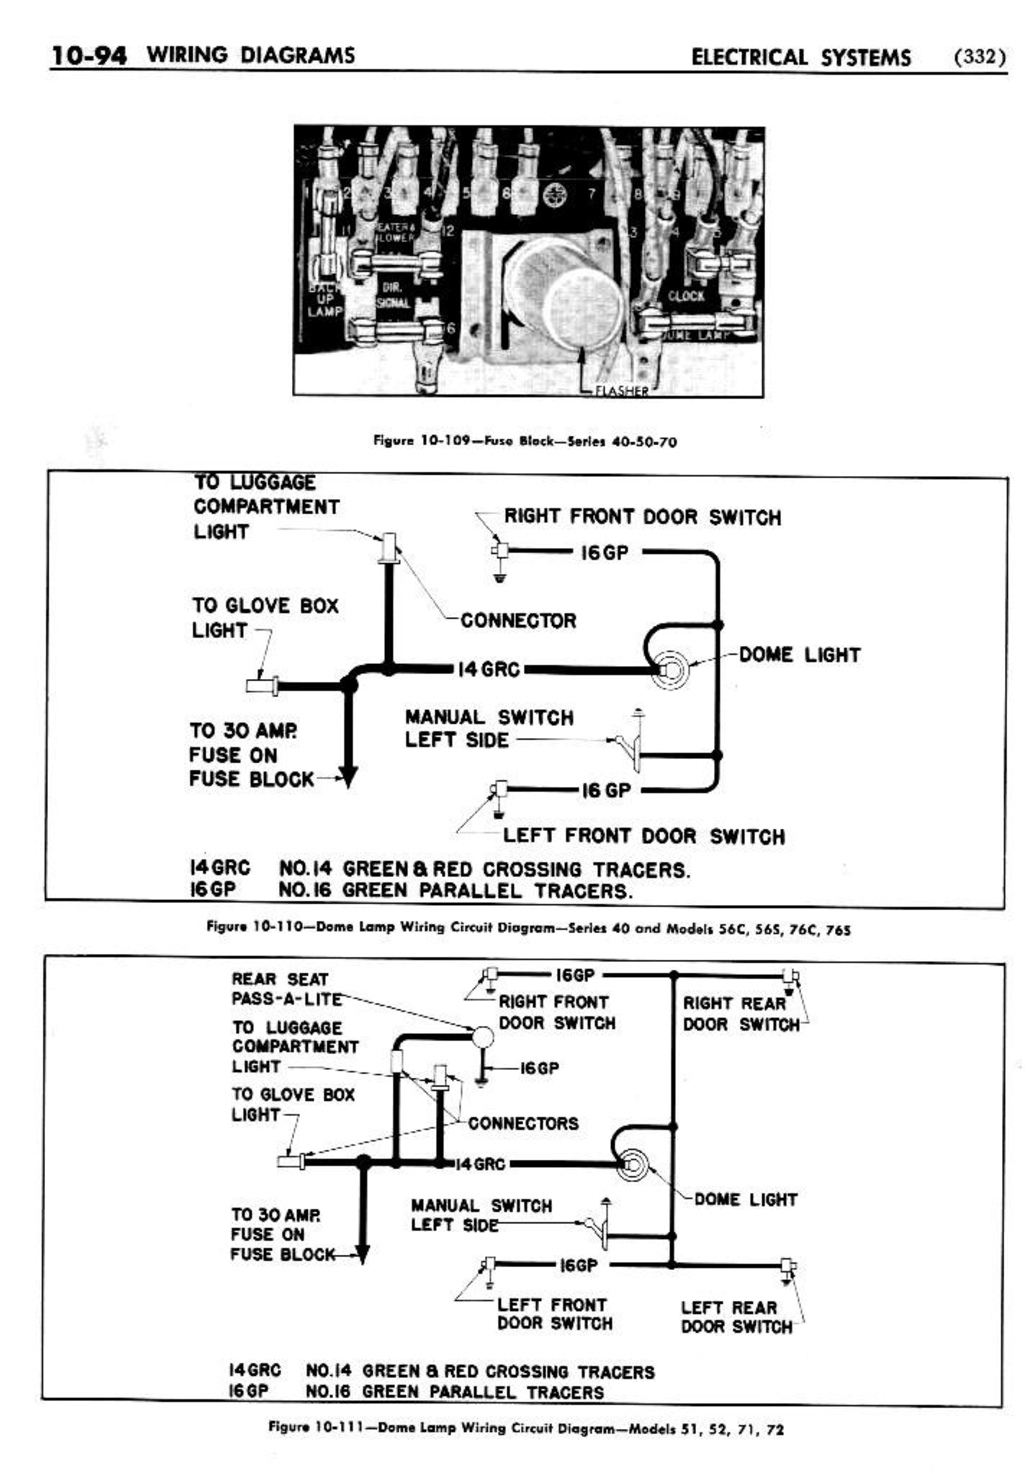 n_11 1950 Buick Shop Manual - Electrical Systems-094-094.jpg